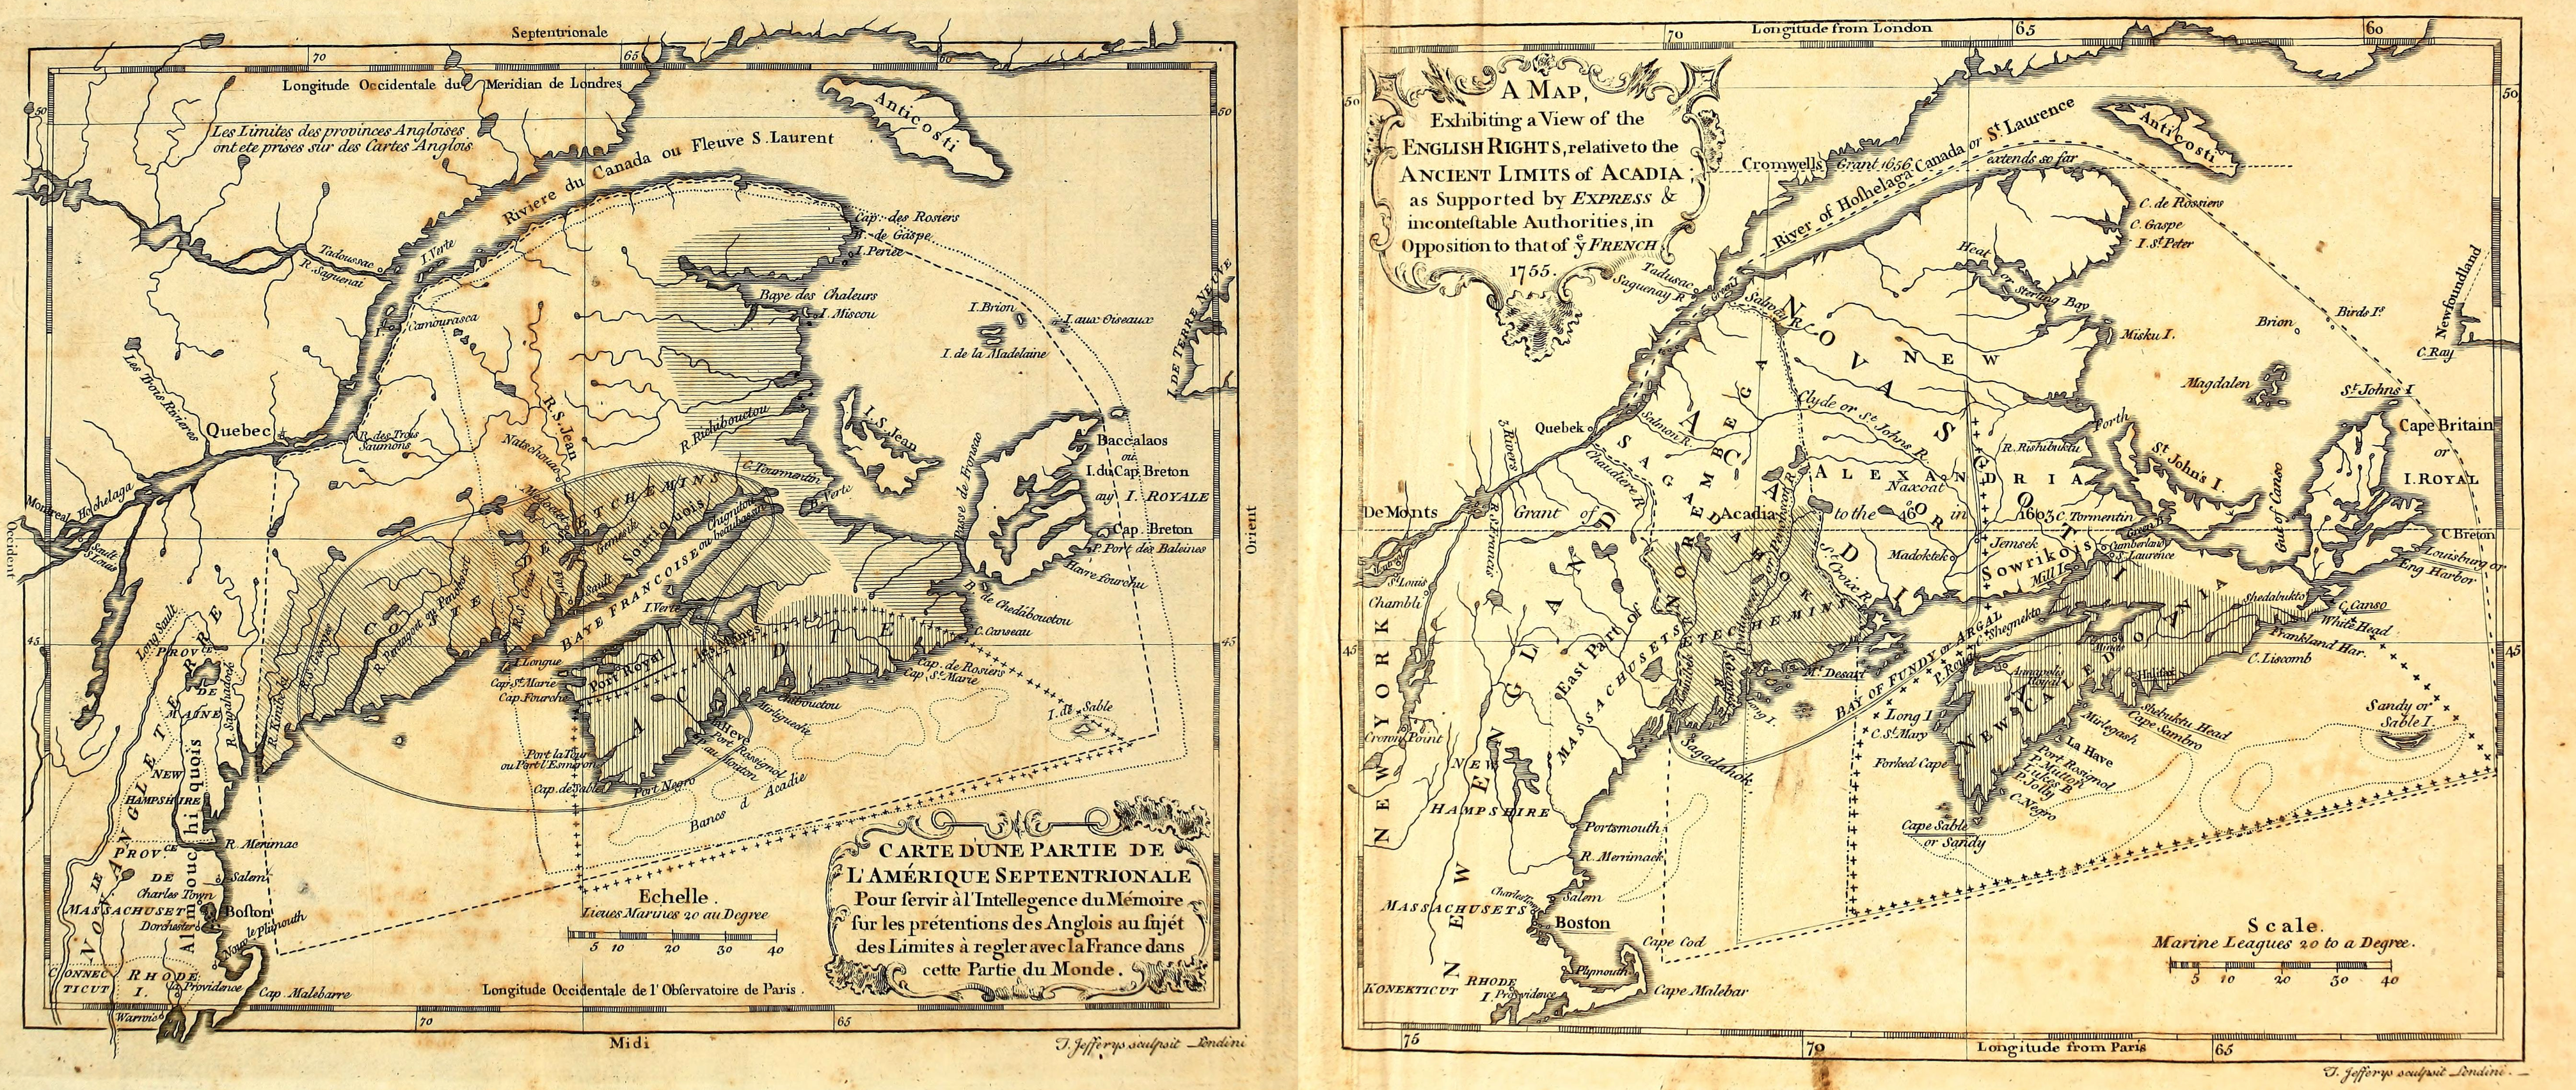 Two maps showing the different French and British interpretations of the boundaries of Acadia.